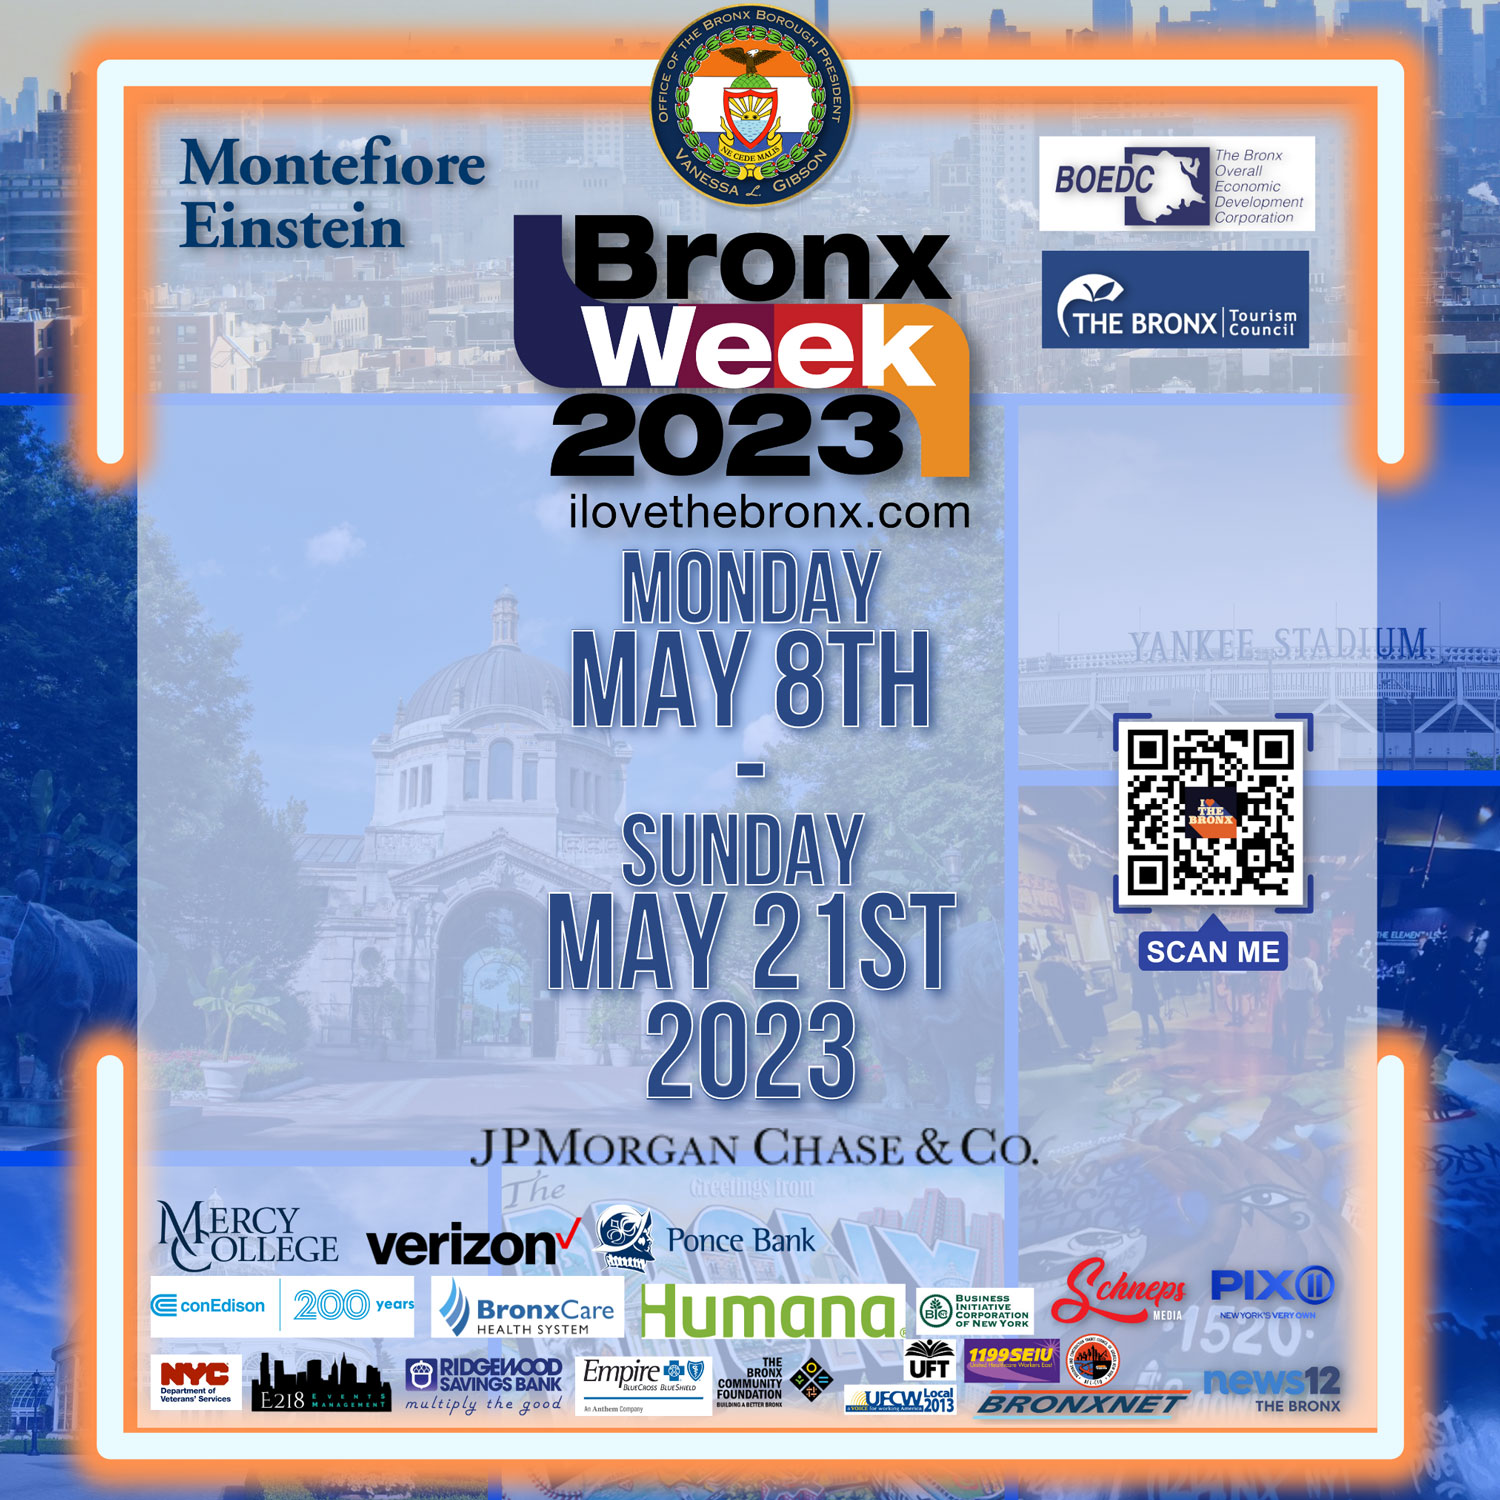 Flyer for Bronx Week 2023, from May 8 through 21